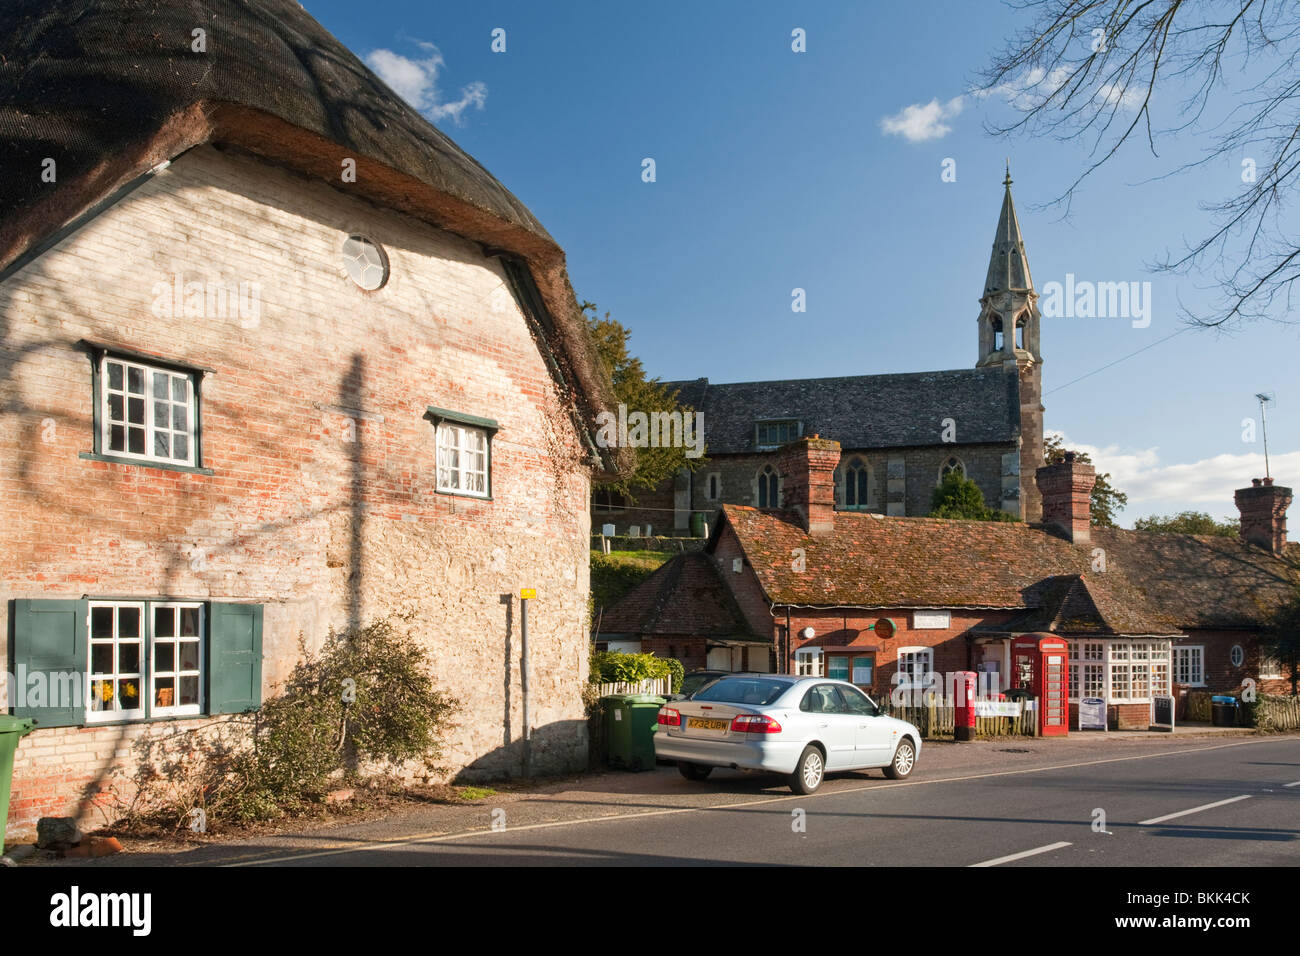 The Thames village of Clifton Hampden with a view of the Post Office and Church of St Michael and All Angels, Oxfordshire, Uk Stock Photo